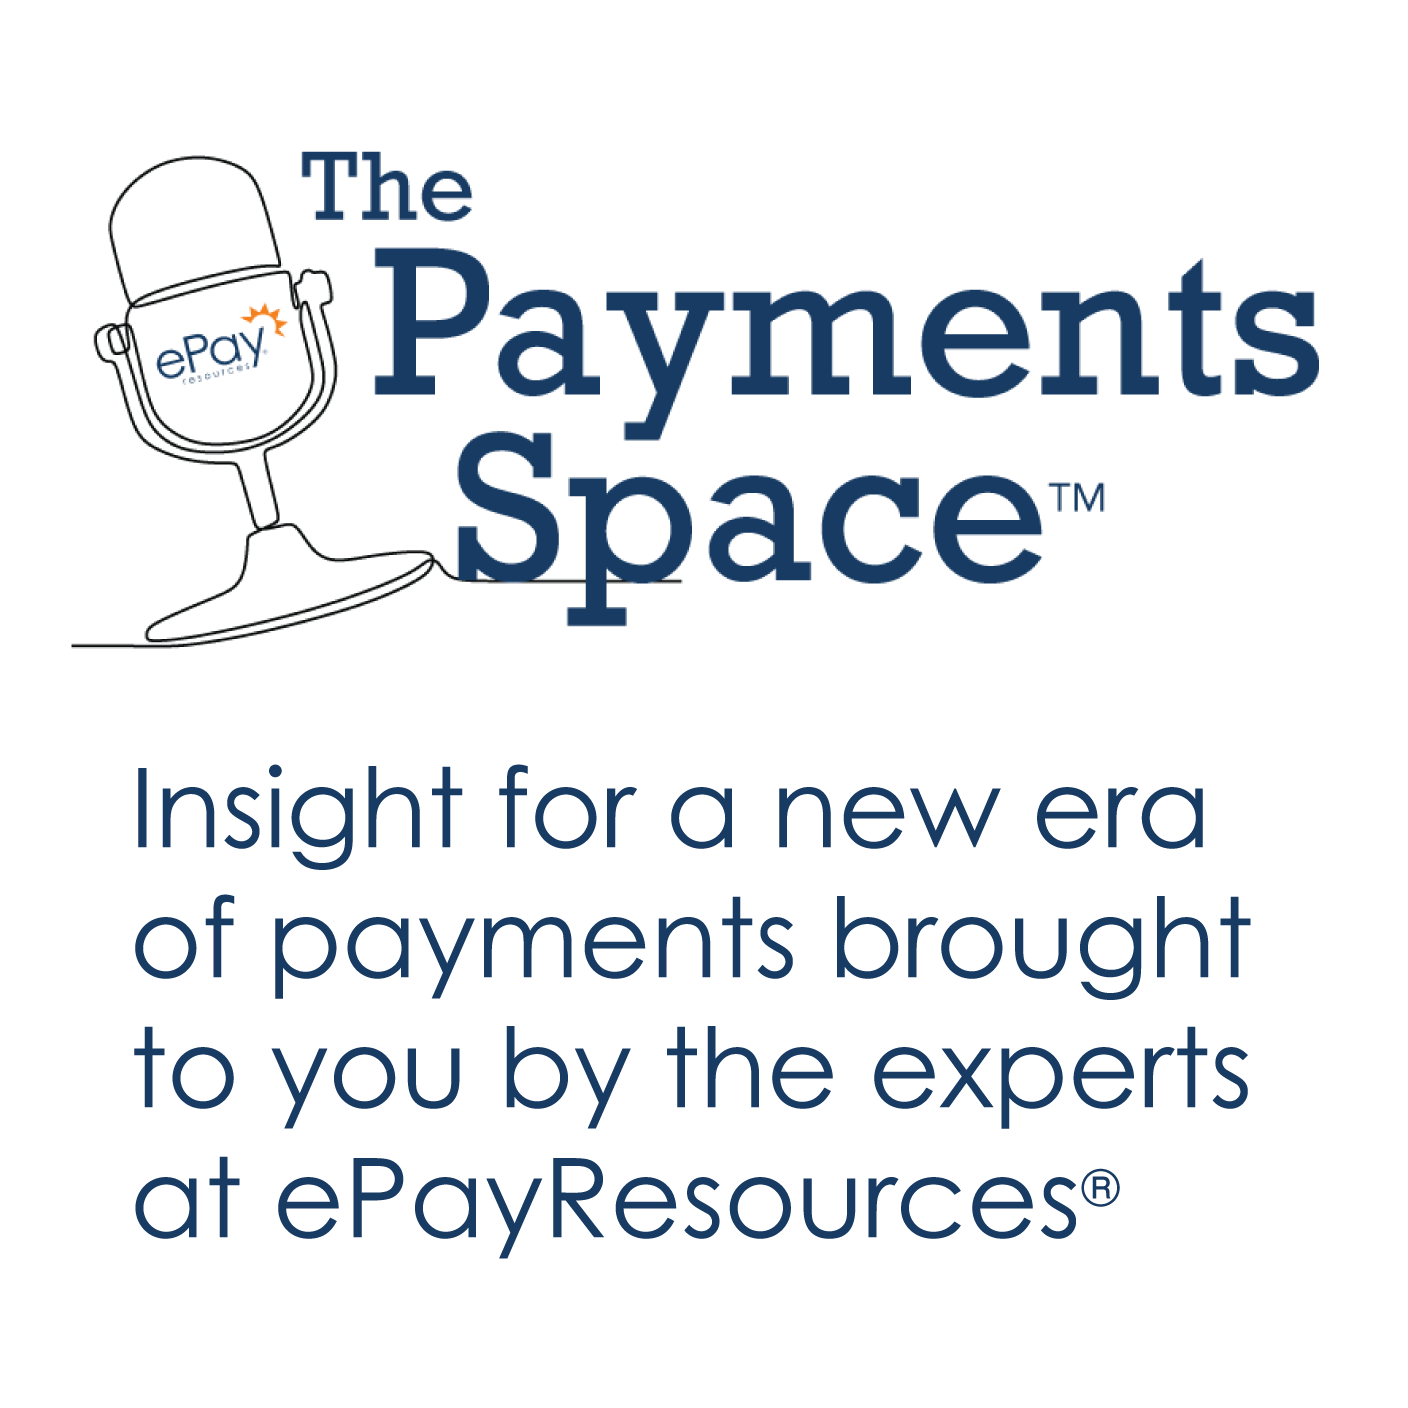 Artwork for The Payments Space™